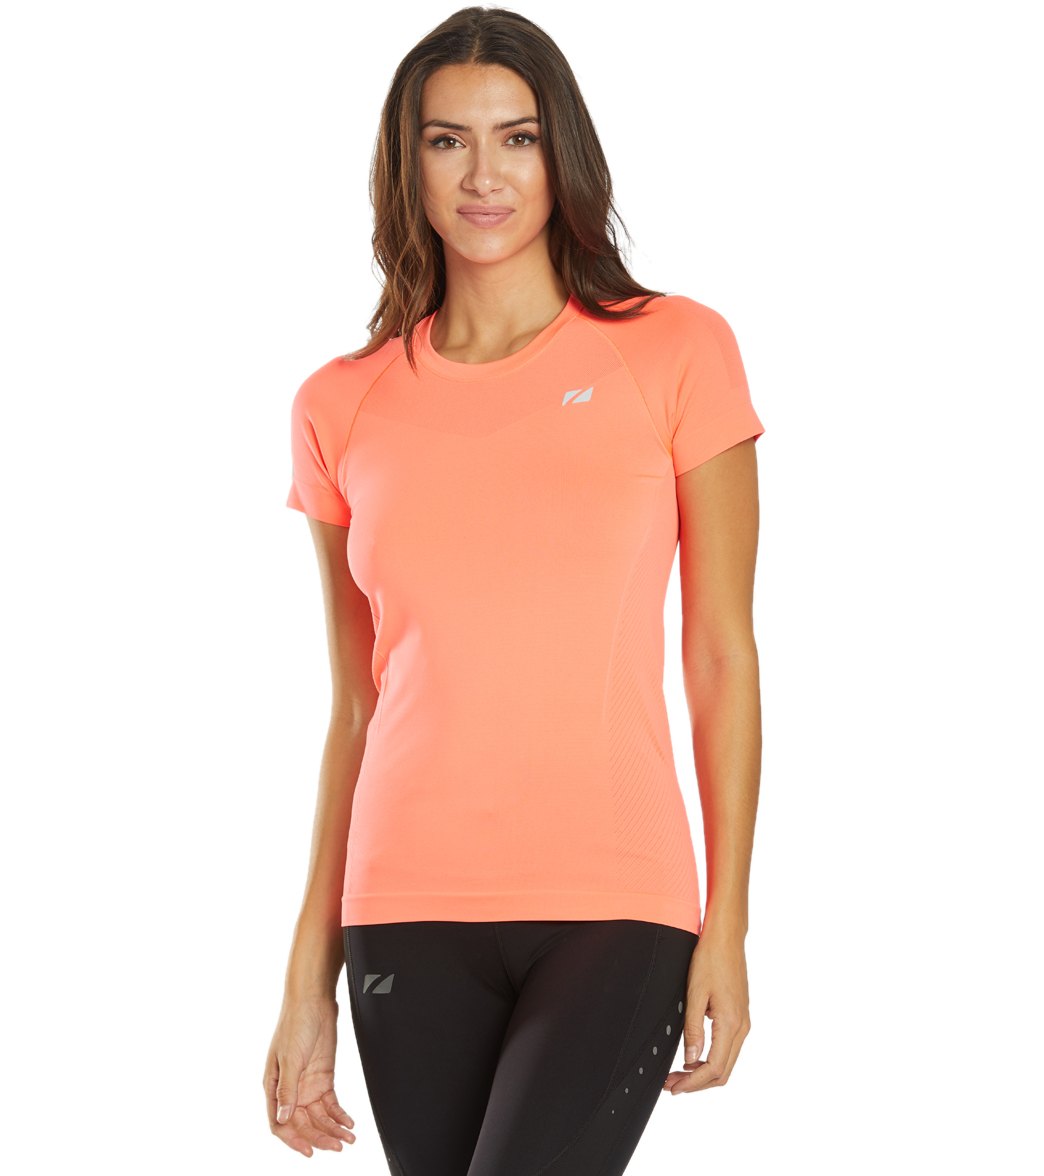 Zone3 Women's Seamless Compression Short Sleeve Top - Neon Coral Medium Polyester - Swimoutlet.com